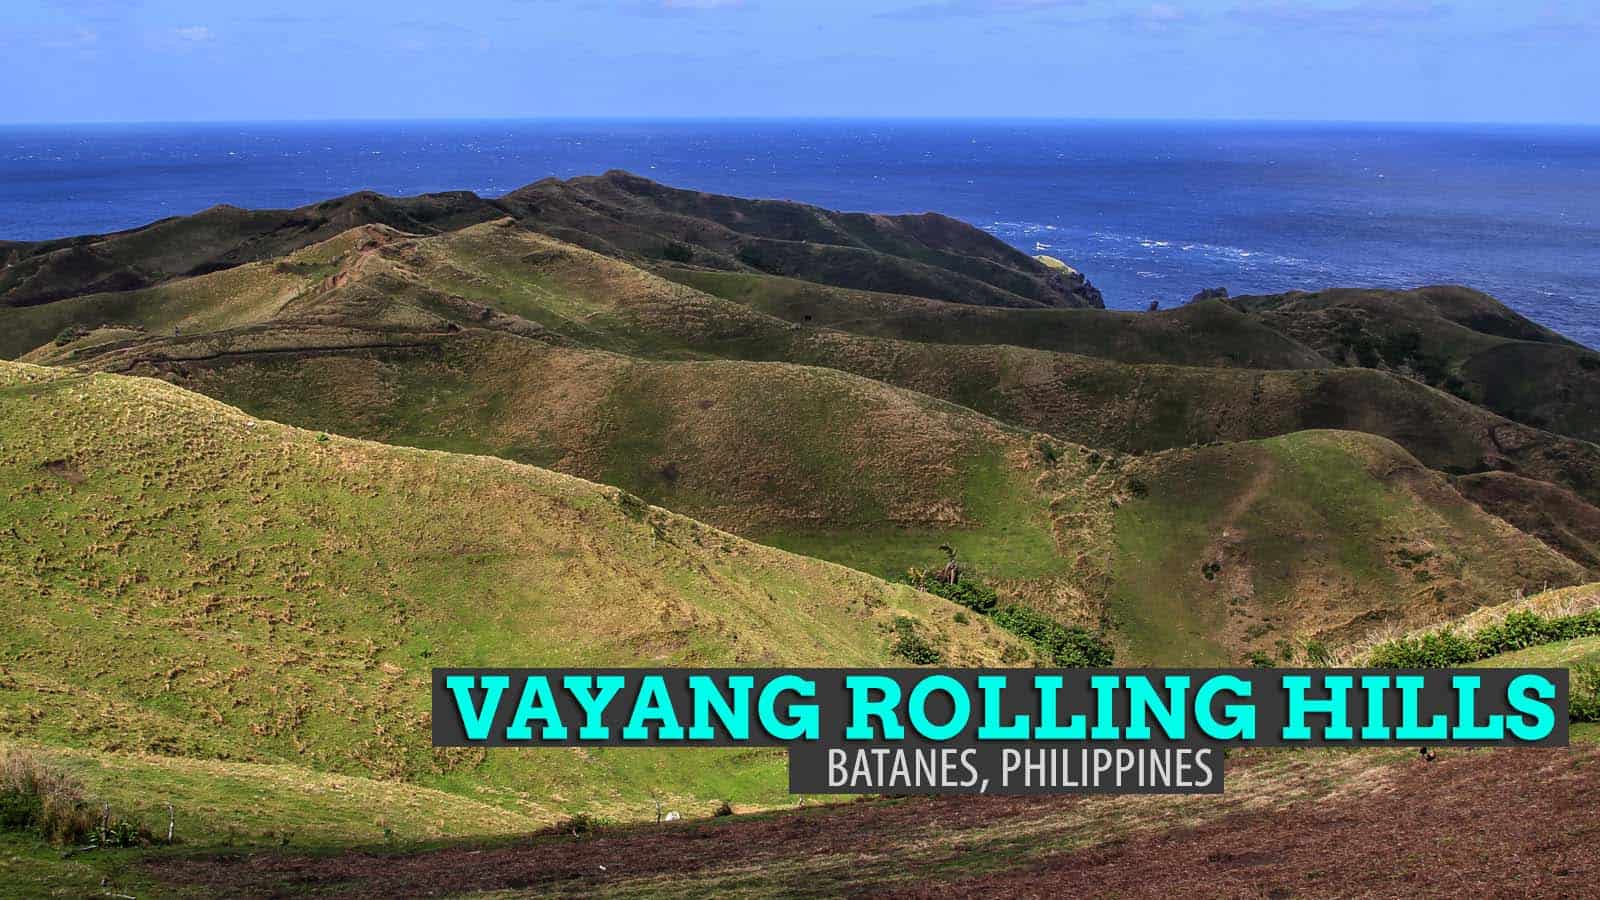 In Pictures: Vayang Rolling Hills, Batanes, Philippines